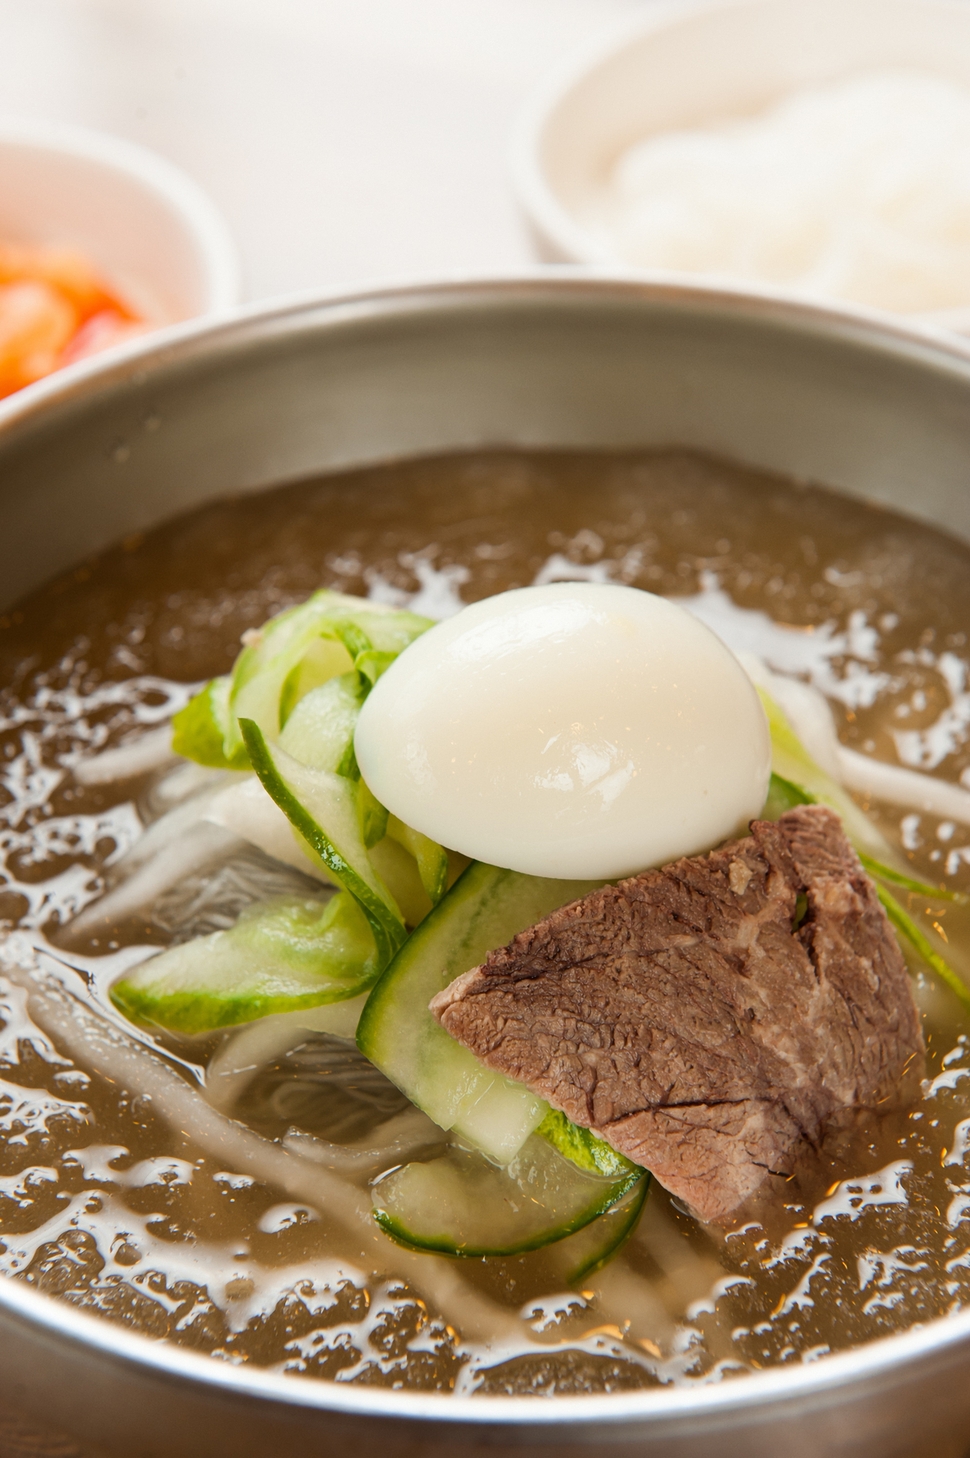 [Jul] Either cold or hot – popular Korean dishes help deal with sweltering summers Photo